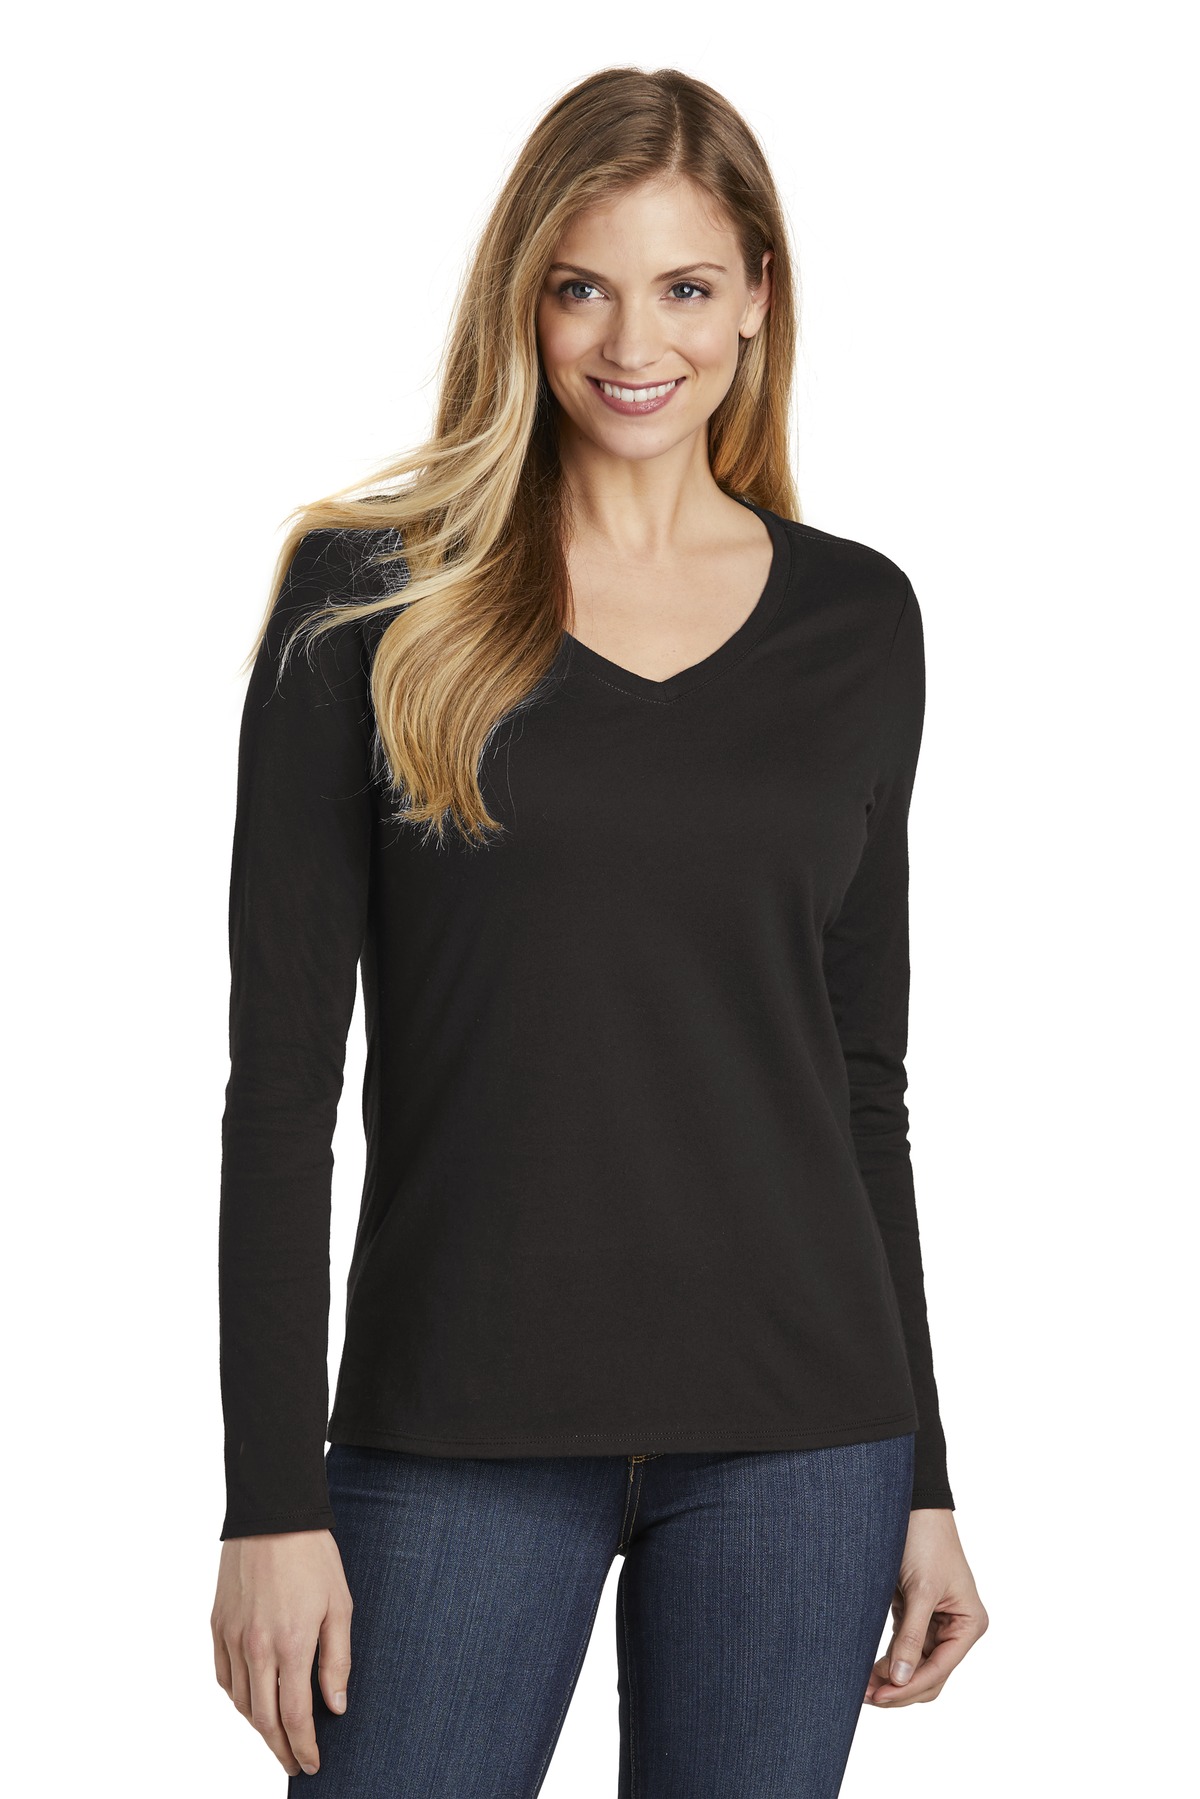 District  &#174;  Women's Very Important Tee  &#174;  Long Sleeve V-Neck.